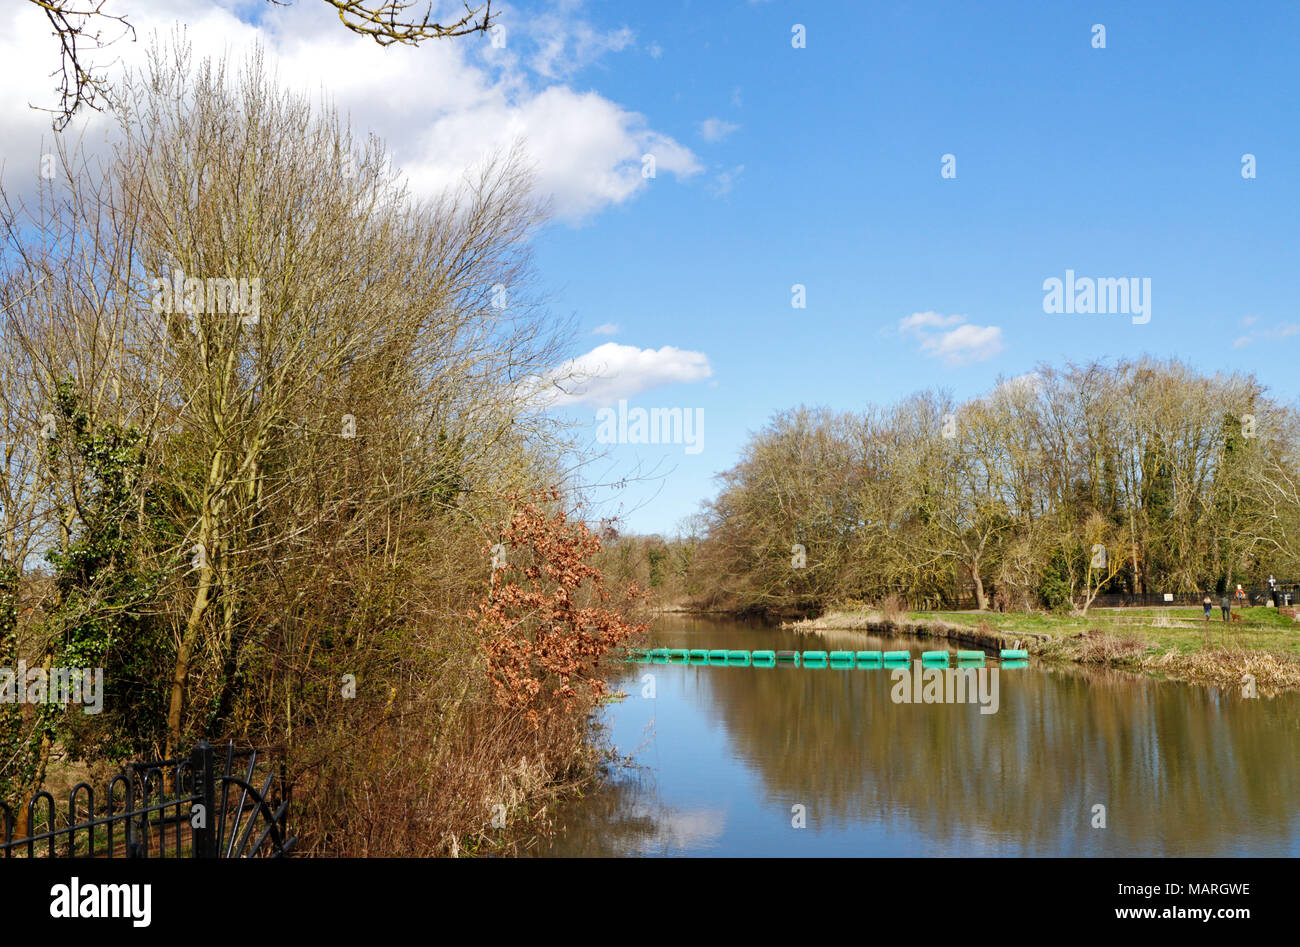 A view of the River Bure upstream of the former watermill at Horstead on the Norfolk Broads near Coltishall, Norfolk, England, United Kingdom, Europe. Stock Photo